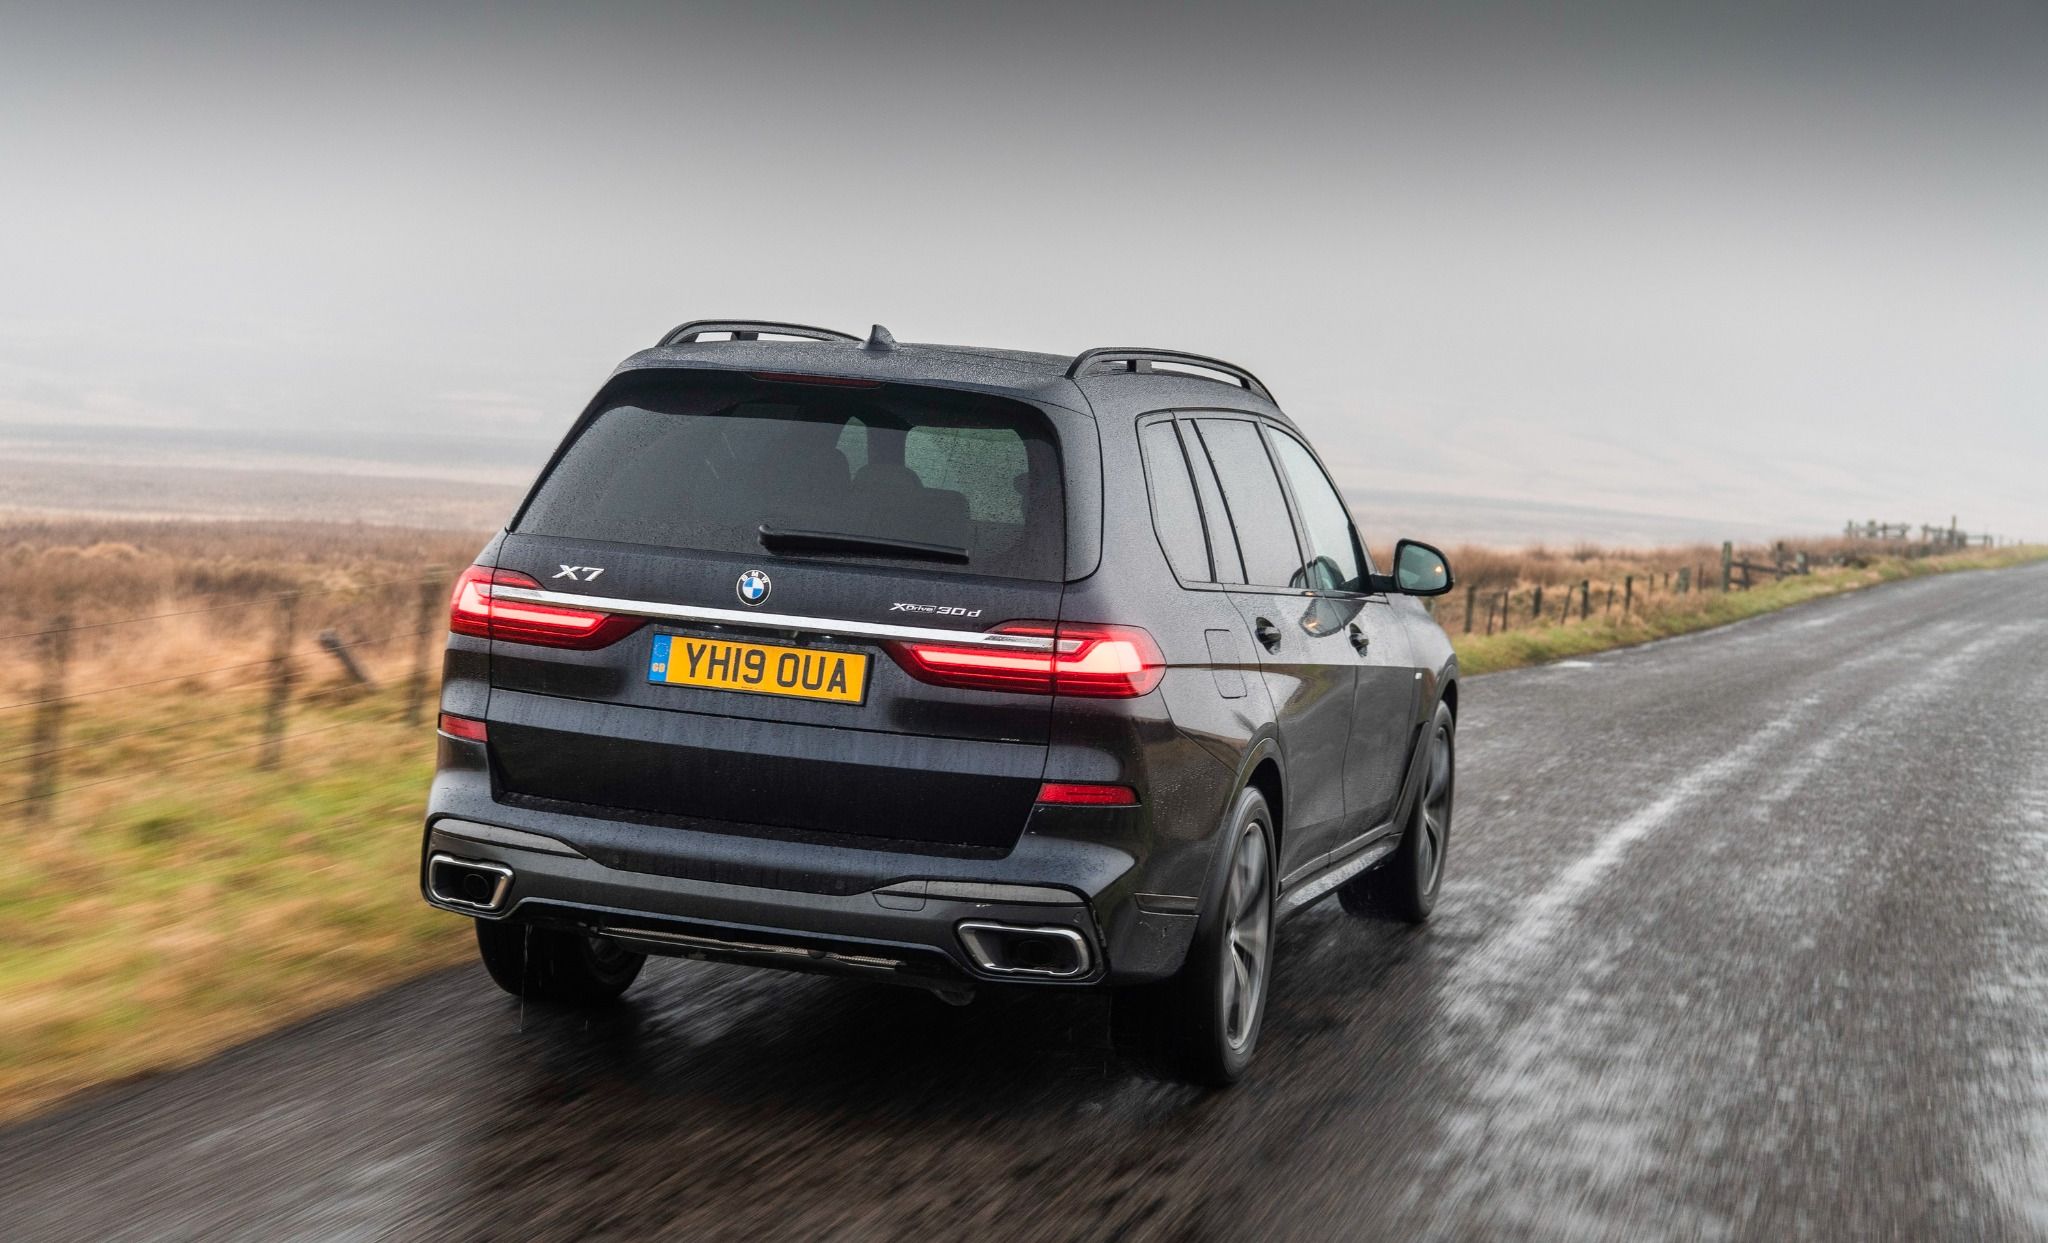 rear view of the BMW X7 driving on the road